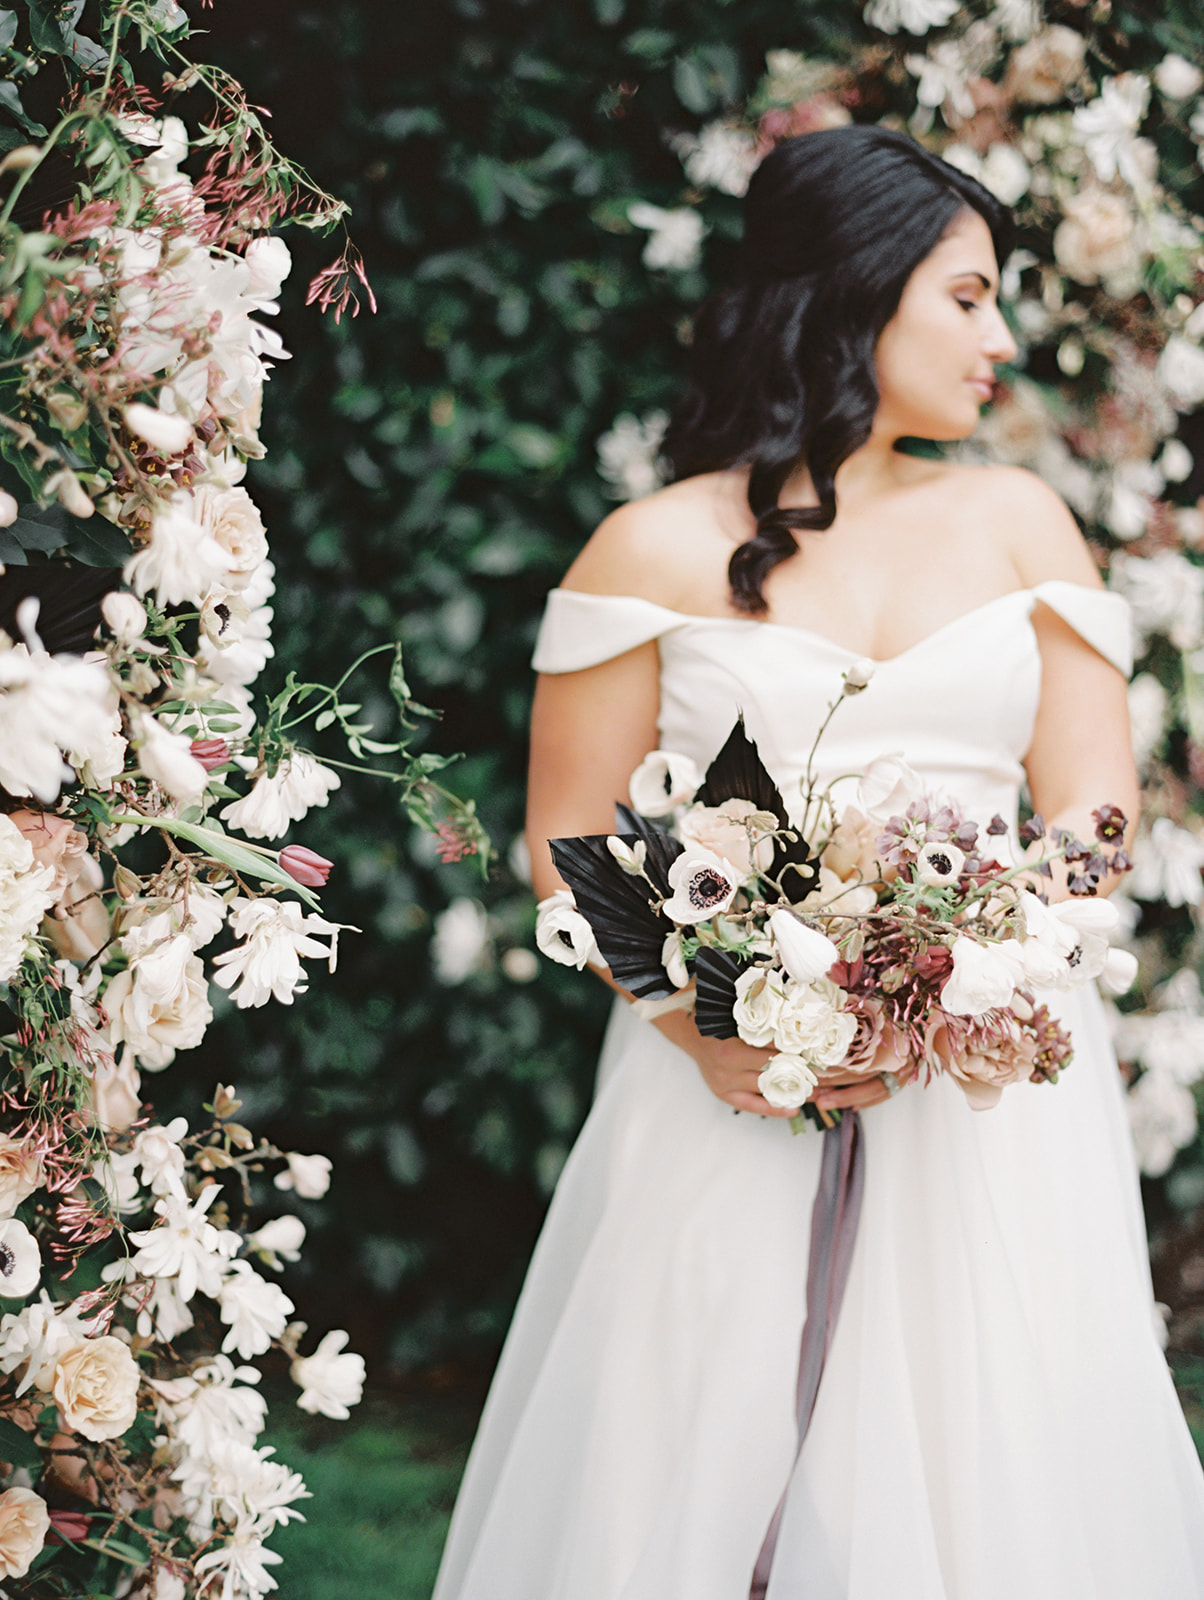 A bride holding a wedding bouquet with anenomes, roses, and tulips